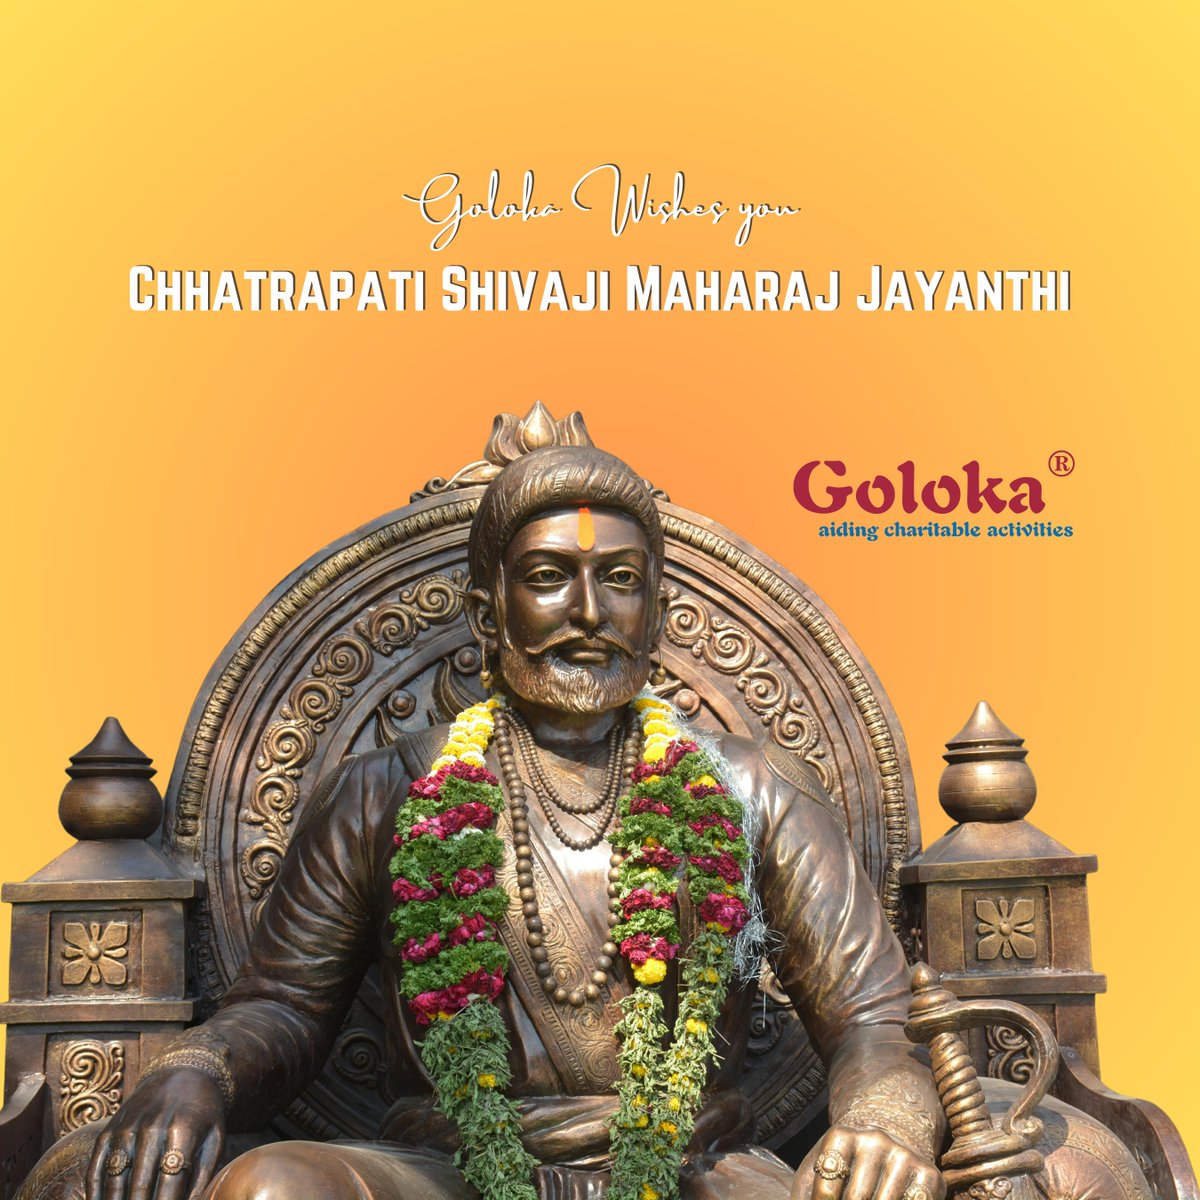 On #AuspiciousOccasion of #ChhatrapatiShivajiMaharajJayanti, we at #Goloka celebrate legacy of a #TrueWarrior, #leader, & #visionary. May his #courage, #valor, & #CommitmentToJustice continue to #InspireGenerations. Happy #ChhatrapatiShivajiMaharajJayanthi